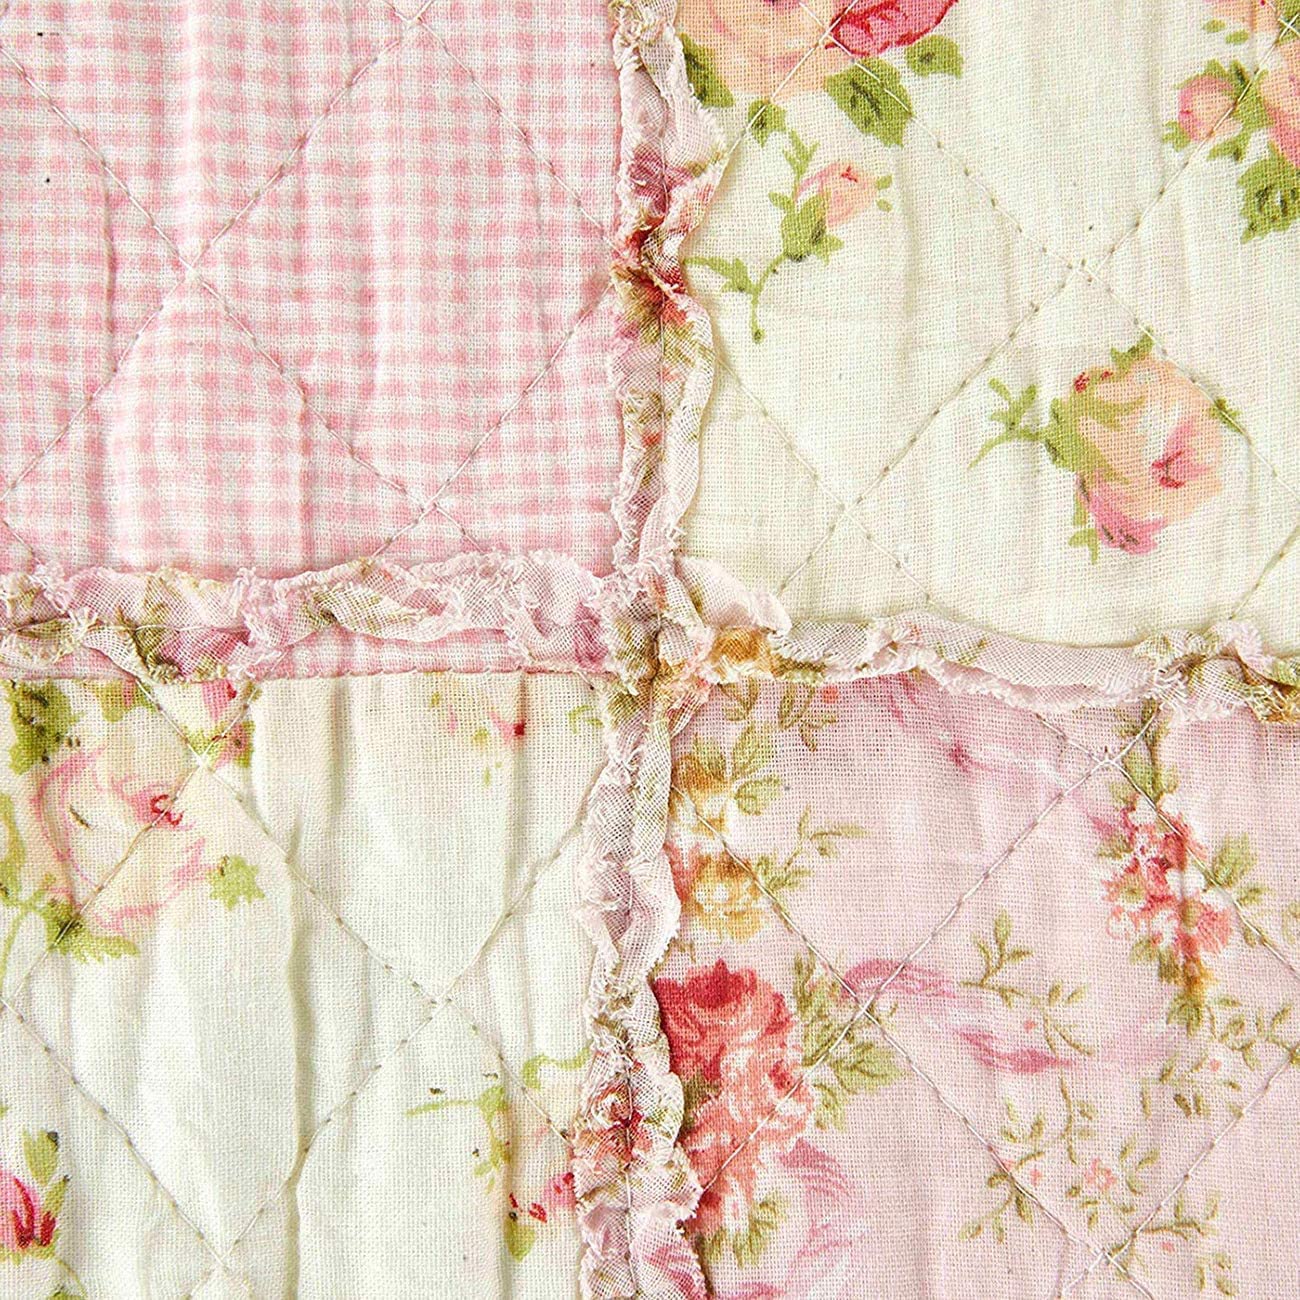 WONGS BEDDING 100% Cotton Pink Floral Patchwork Quilts Single Bed Throw Blanket